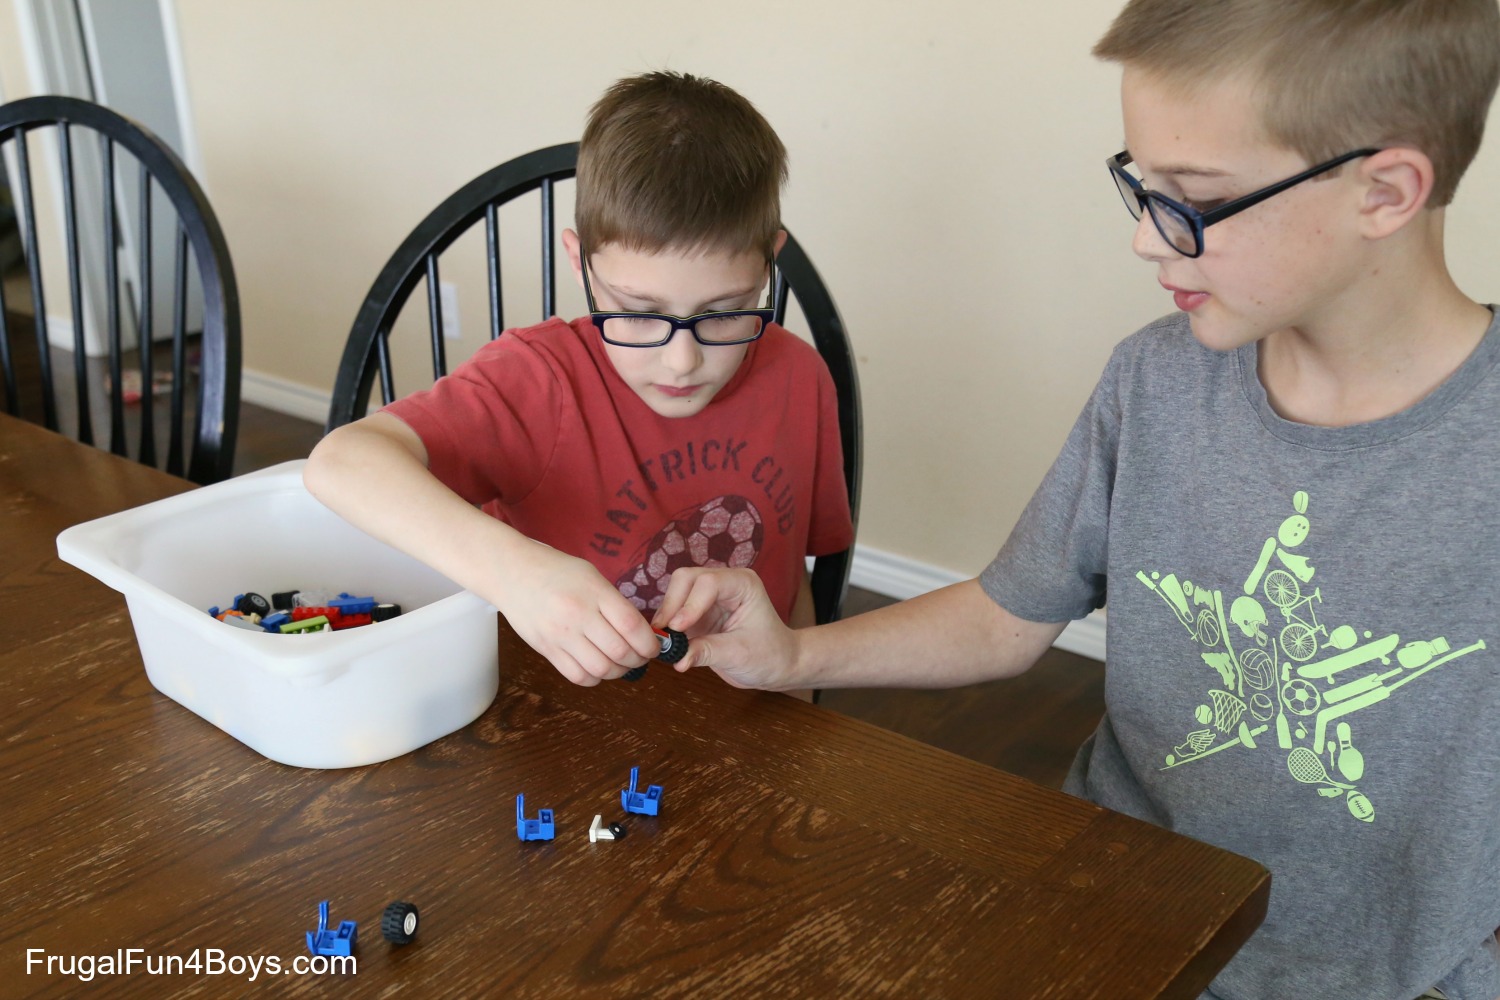 10+ Awesome LEGO Party Games